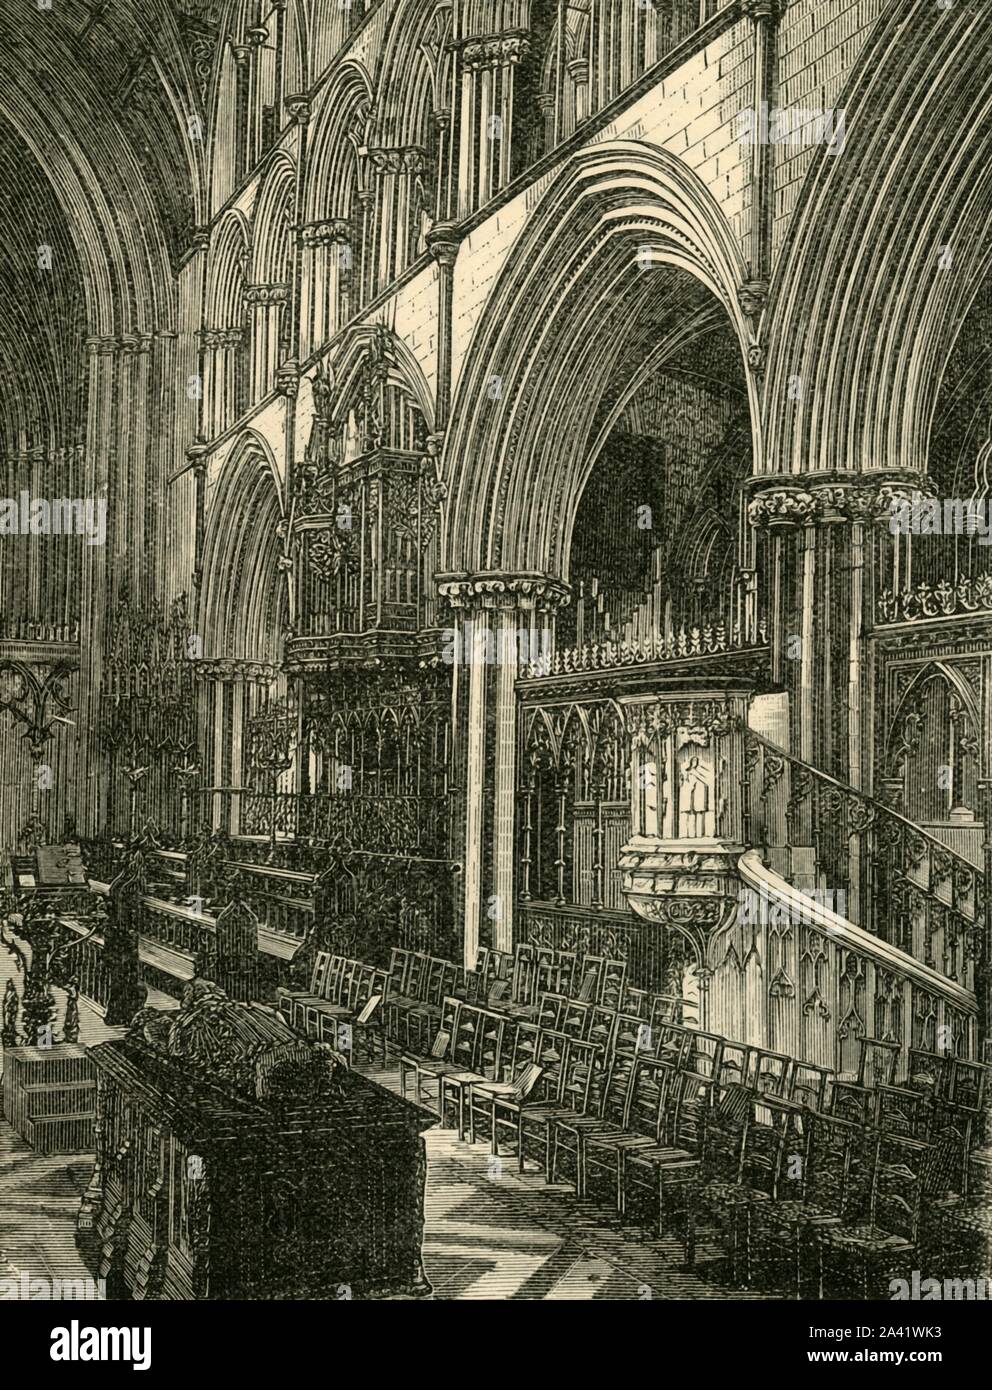 'The Choir of Worcester Cathedral', 1898. Worcester Cathedral built between 1084 and 1504, underwent major restoration by Sir George Gilbert Scott and A. E. Perkins in the 1860s. From &quot;Our Own Country, Volume III&quot;. [Cassell and Company, Limited, London, Paris &amp; Melbourne, 1898] Stock Photo